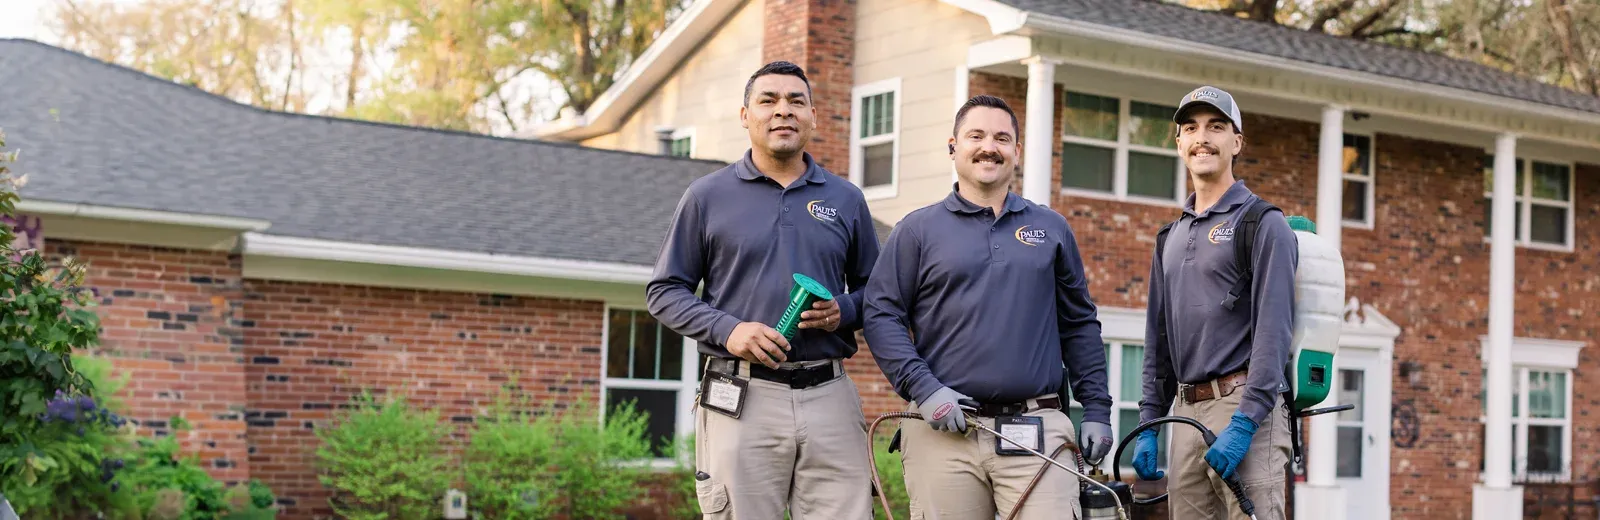 Paul's Pest Control Technicians standing in front of brick home